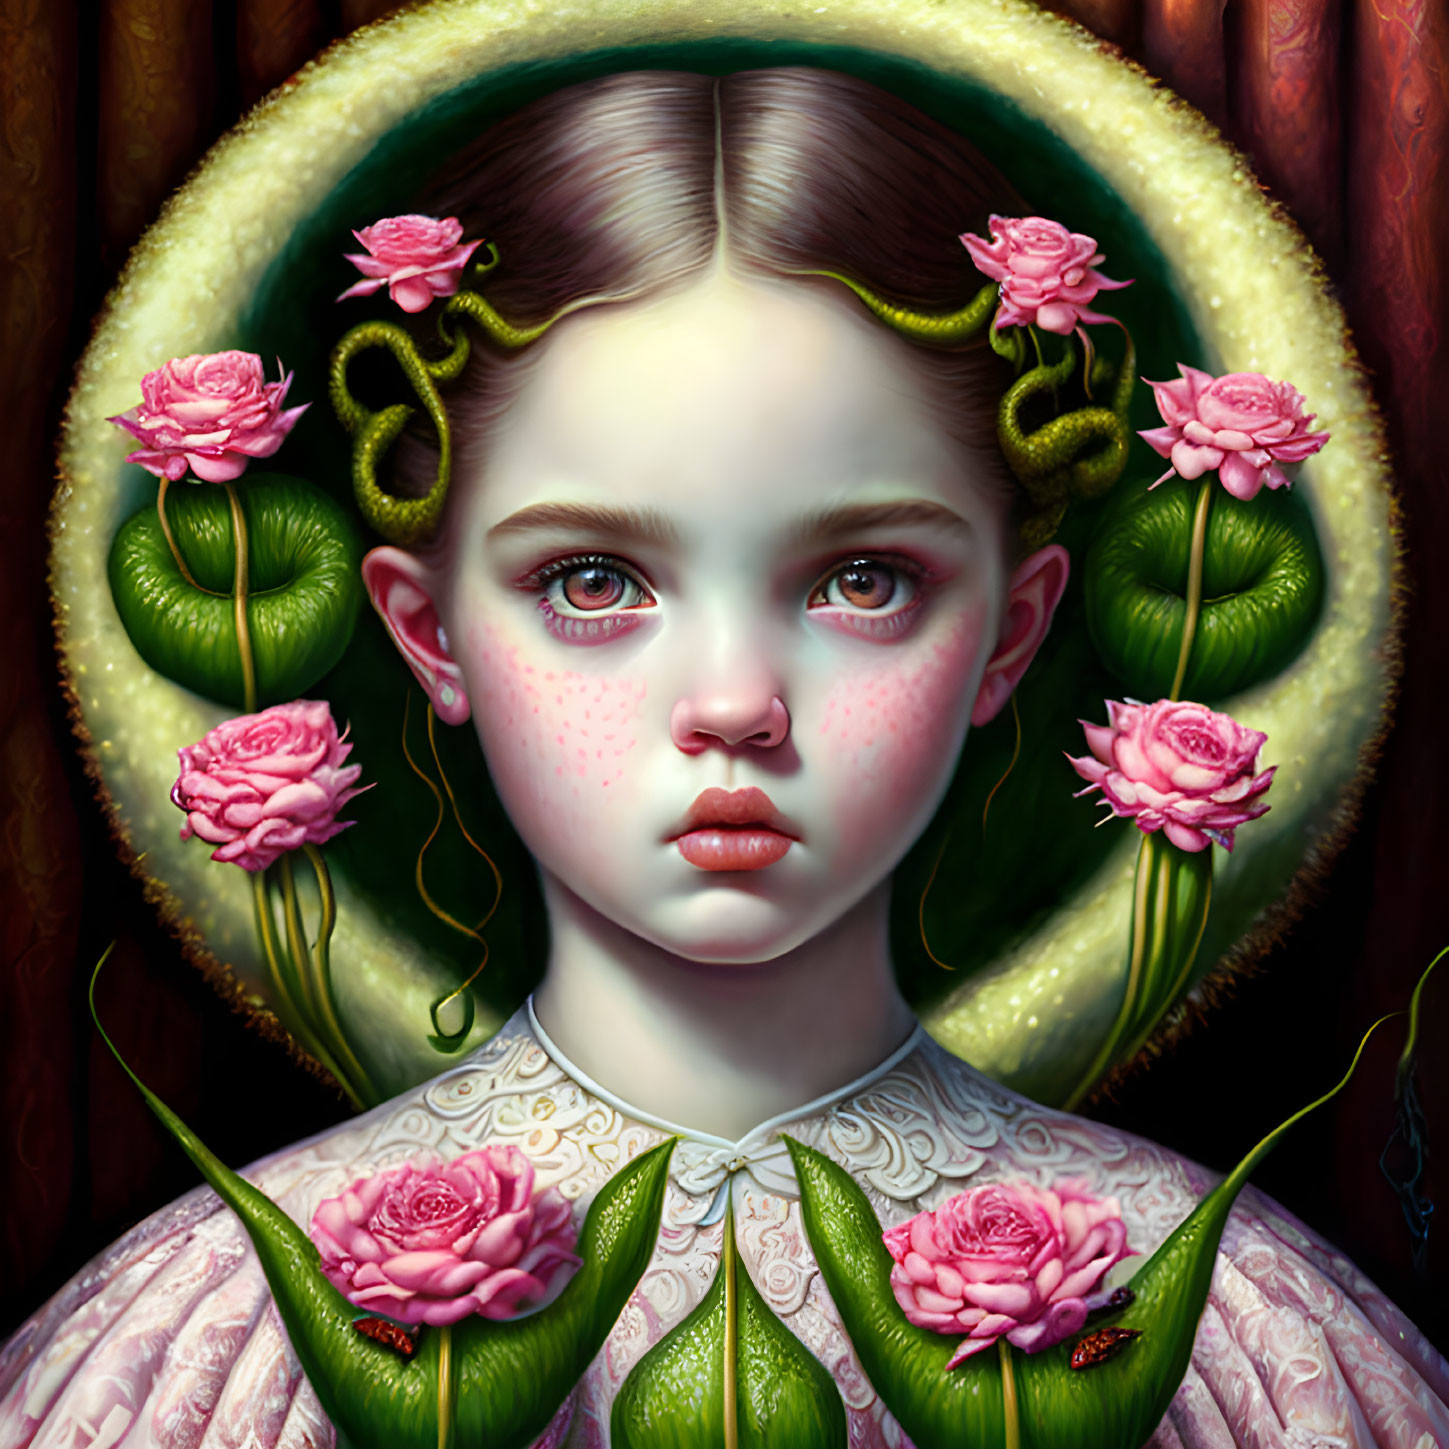 Surreal portrait of girl with rose halo and floral motifs